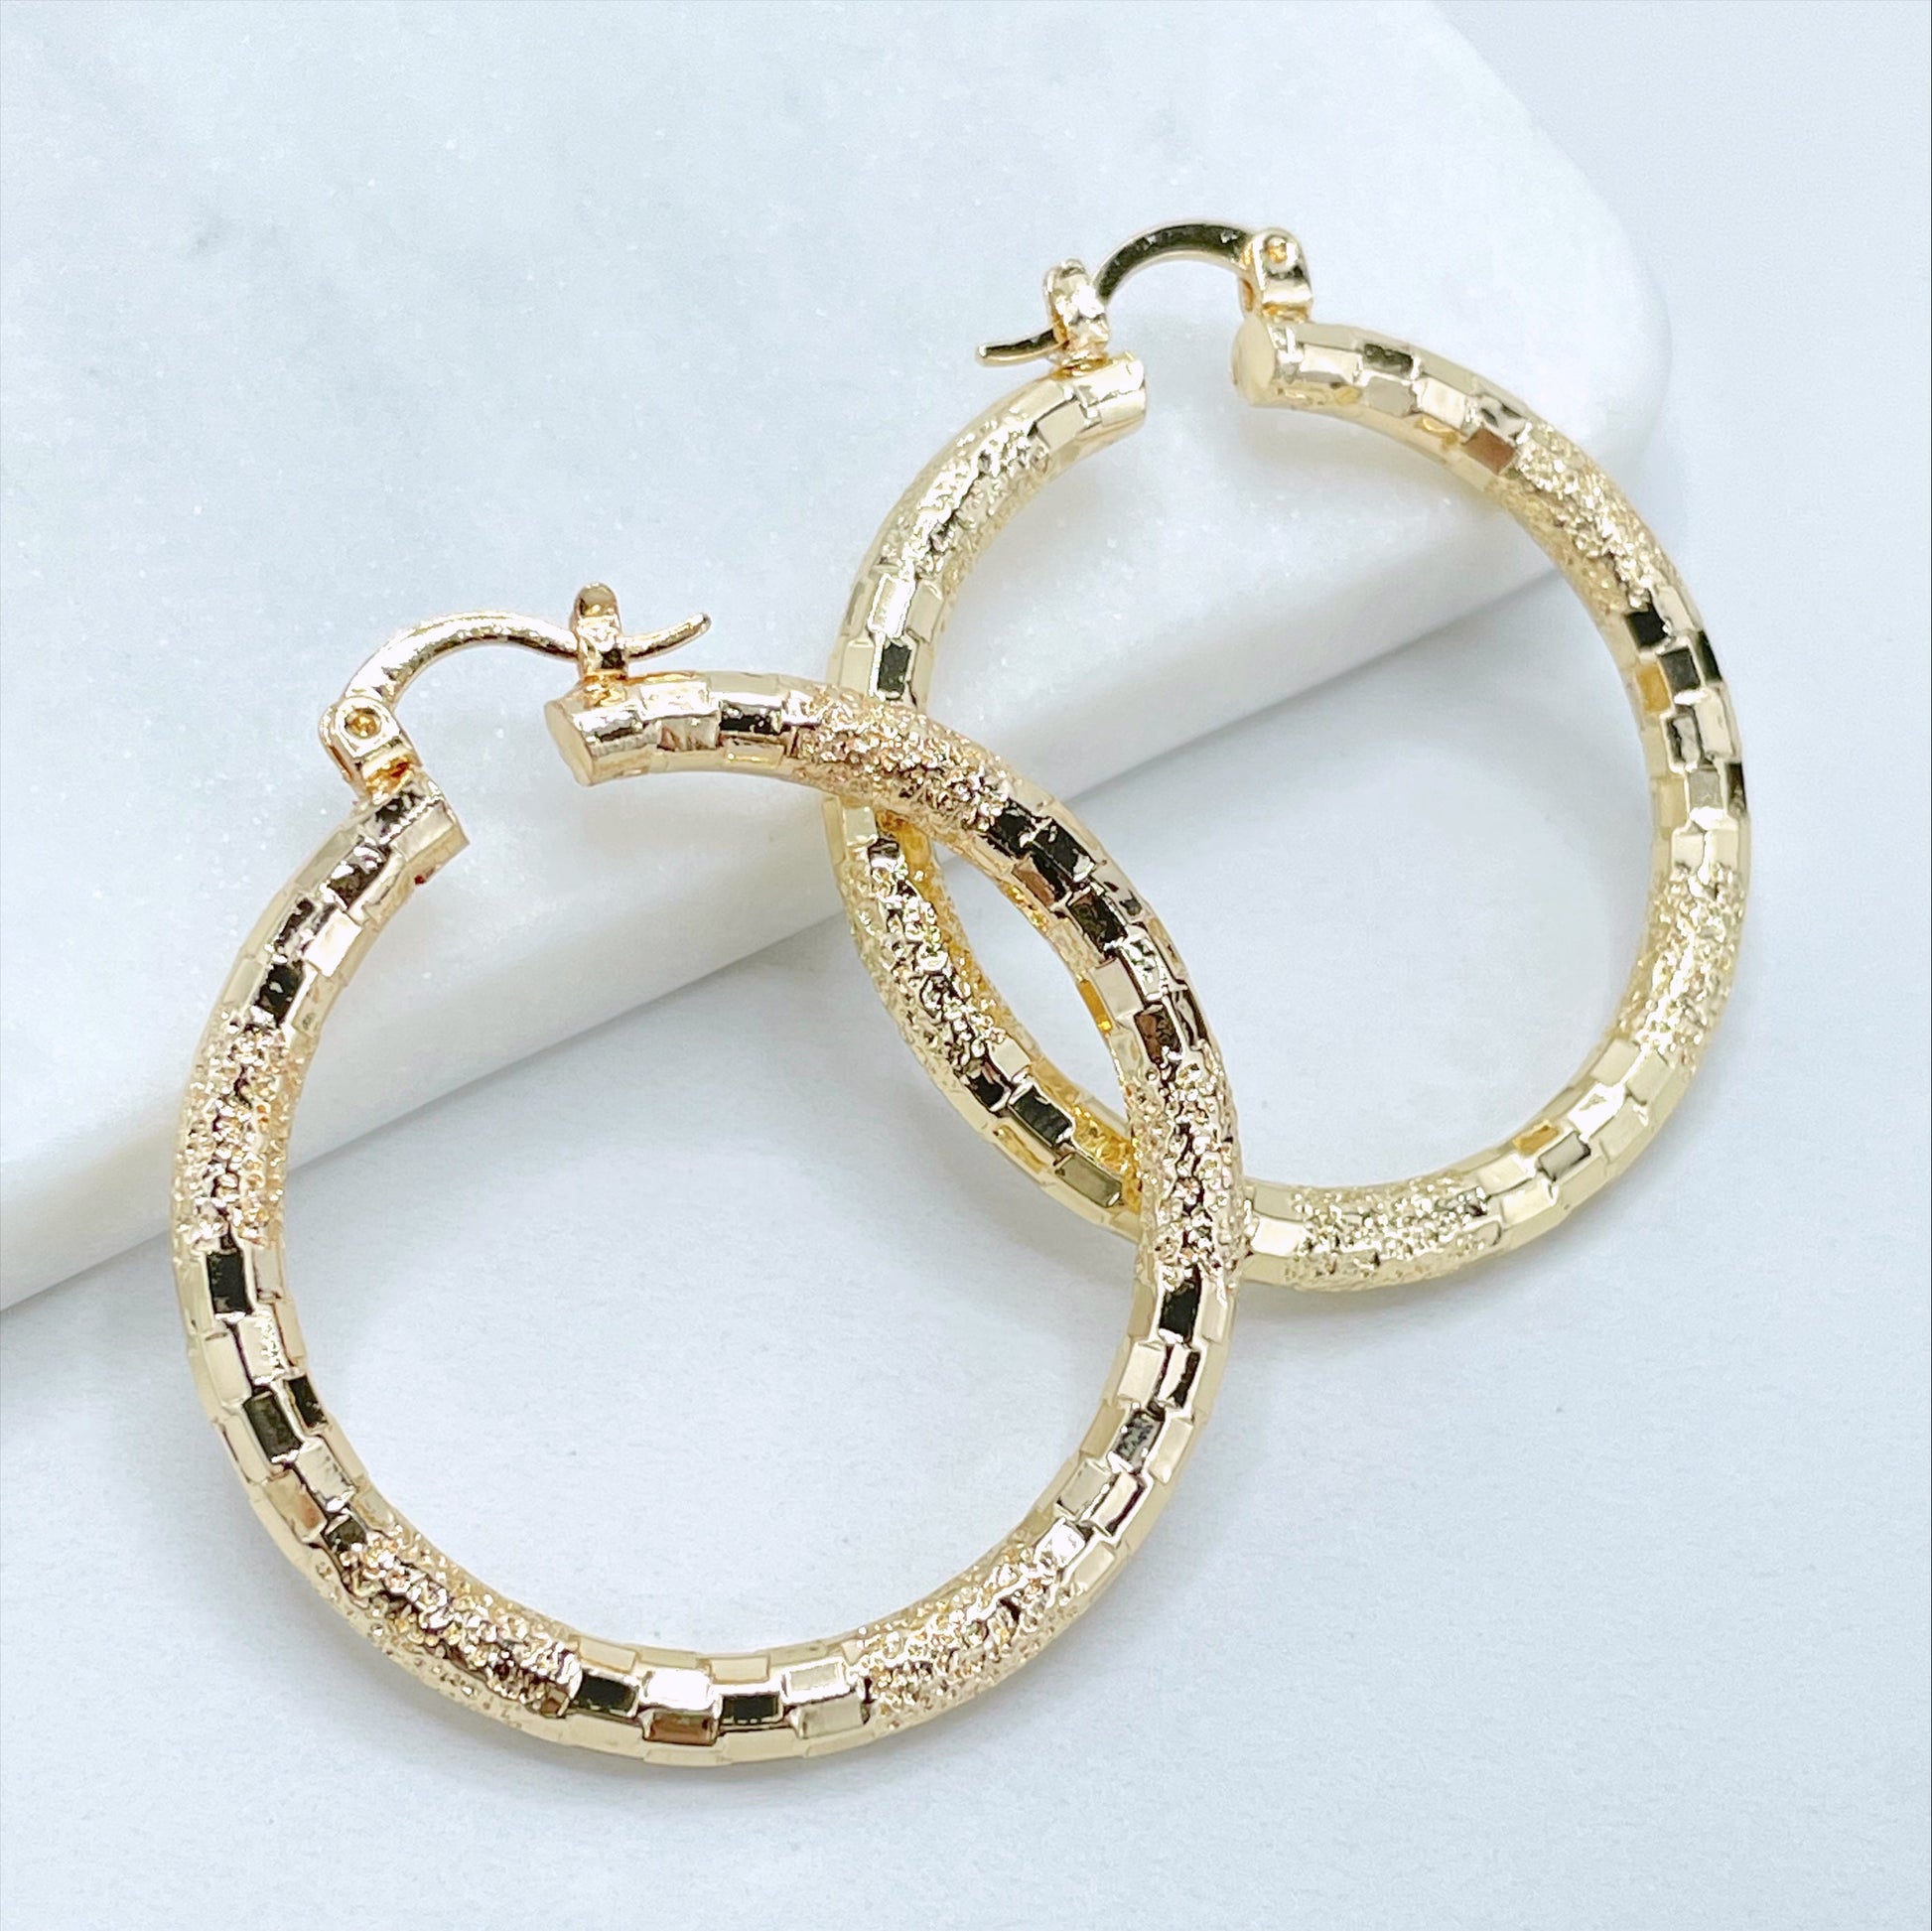 18k Gold Filled 40mm Textured Hoops Earrings, 4mm Thickness, Wholesale Jewelry Making Supplies